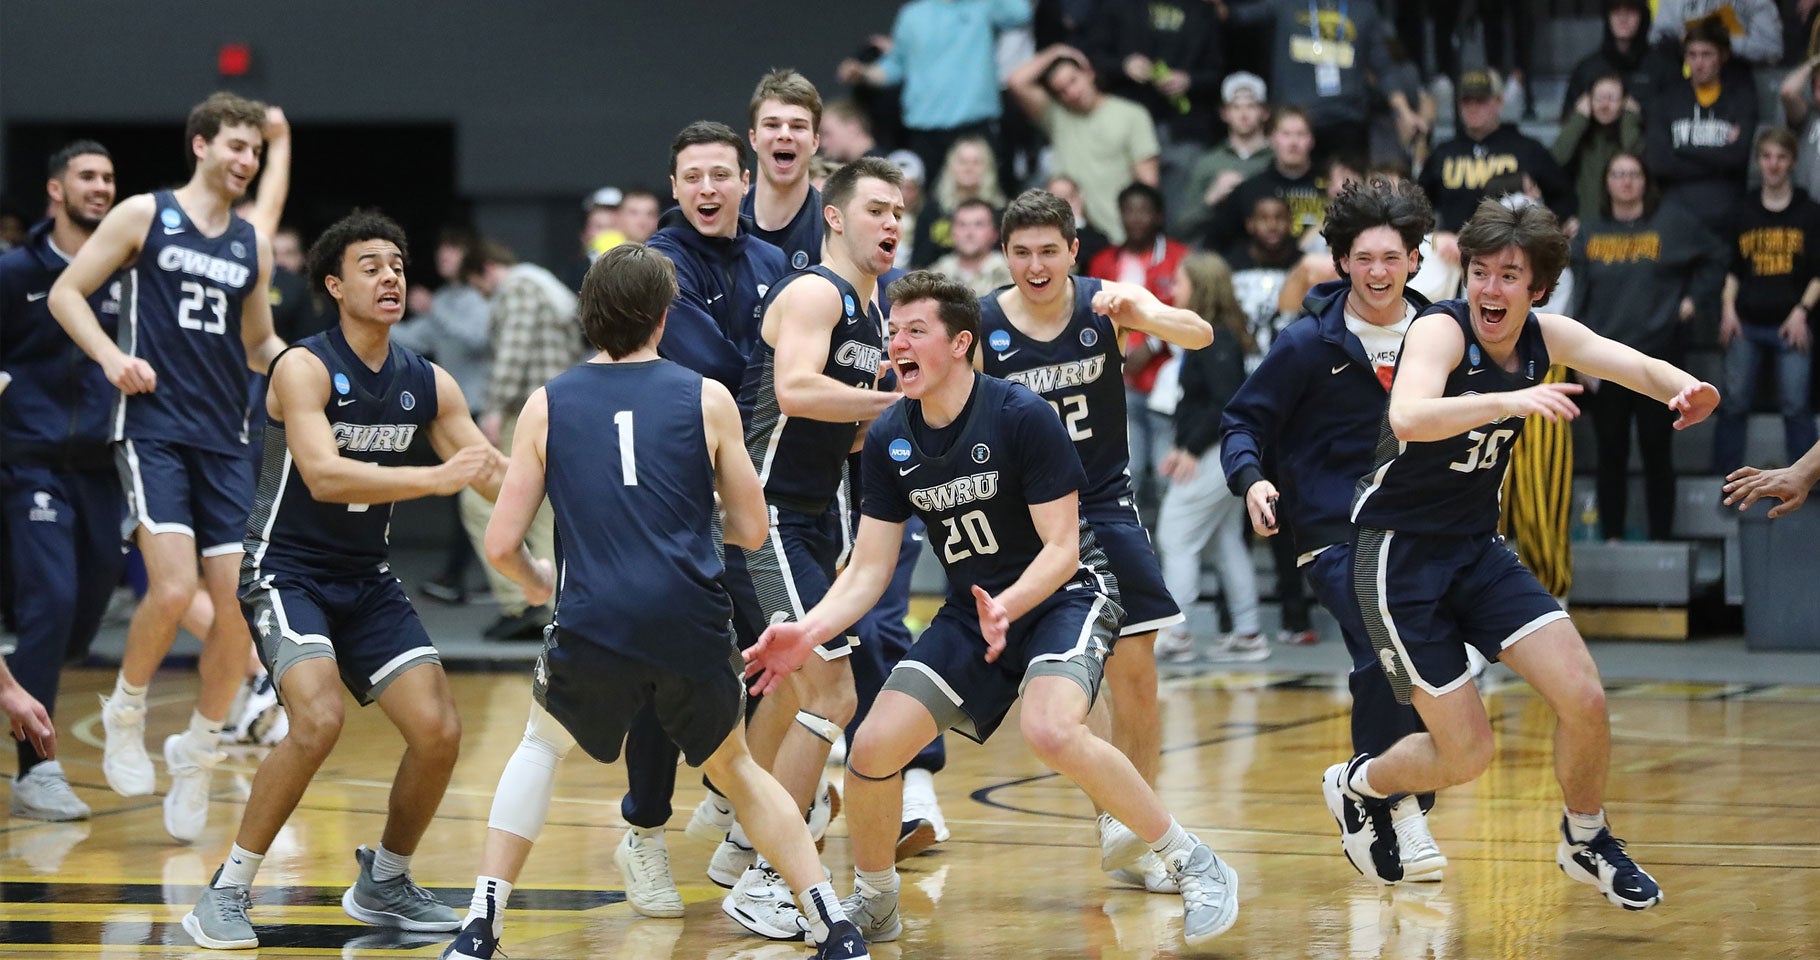 Photo of Case Western Reserve University men's basketball players cheering after a win